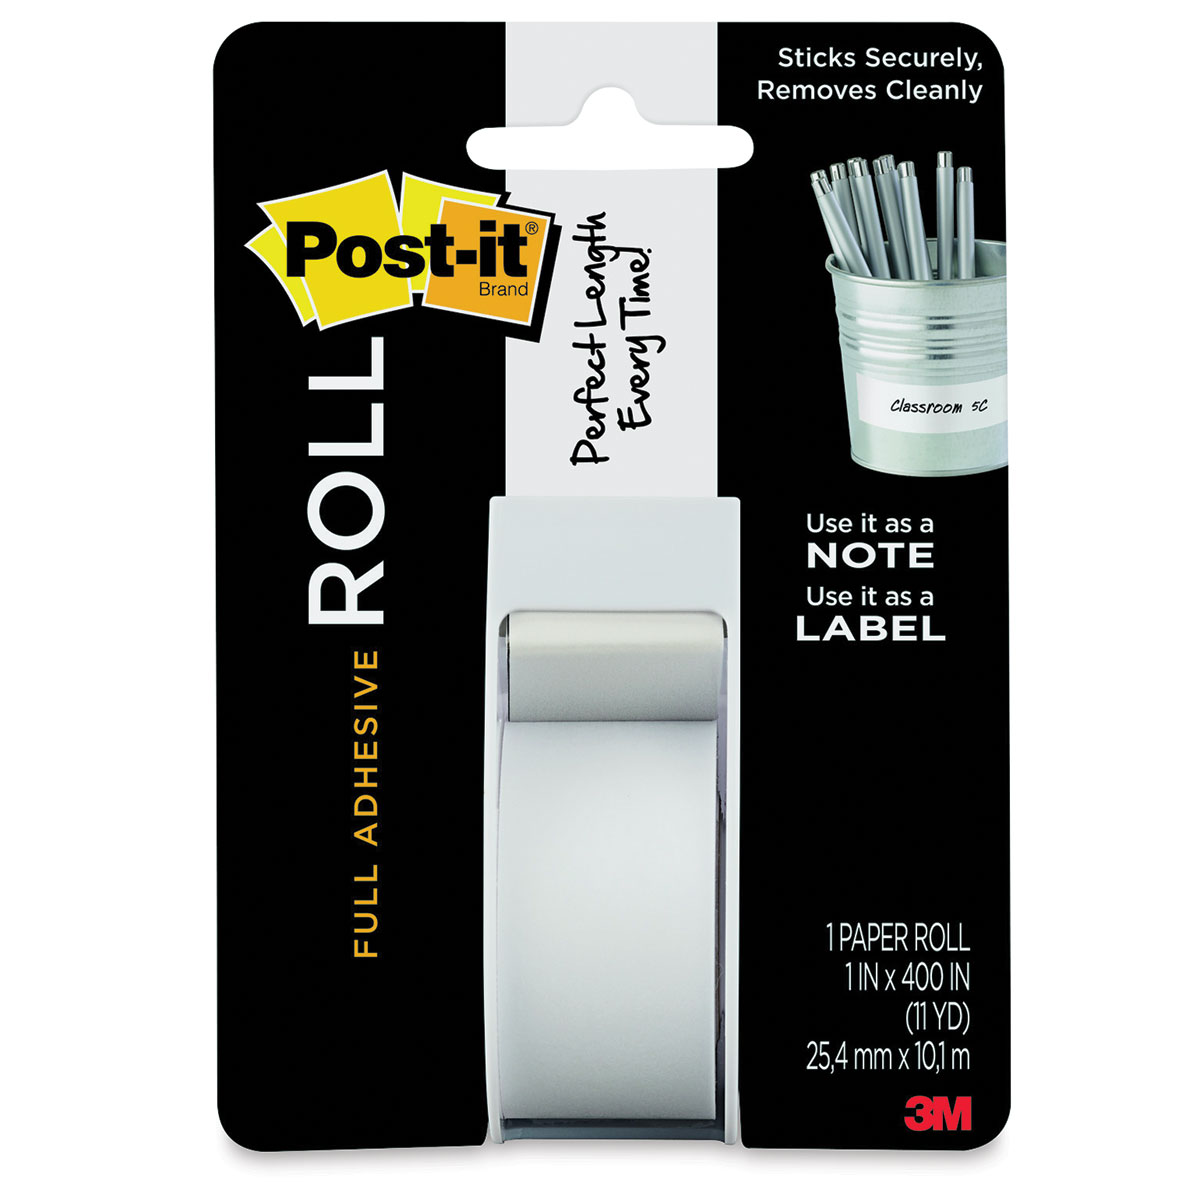 Бумага Top Stick Labels. Cleanly. Stick Removable self-Adhesive Notes. Post it Notes super Sticky 2x sticking Powder.